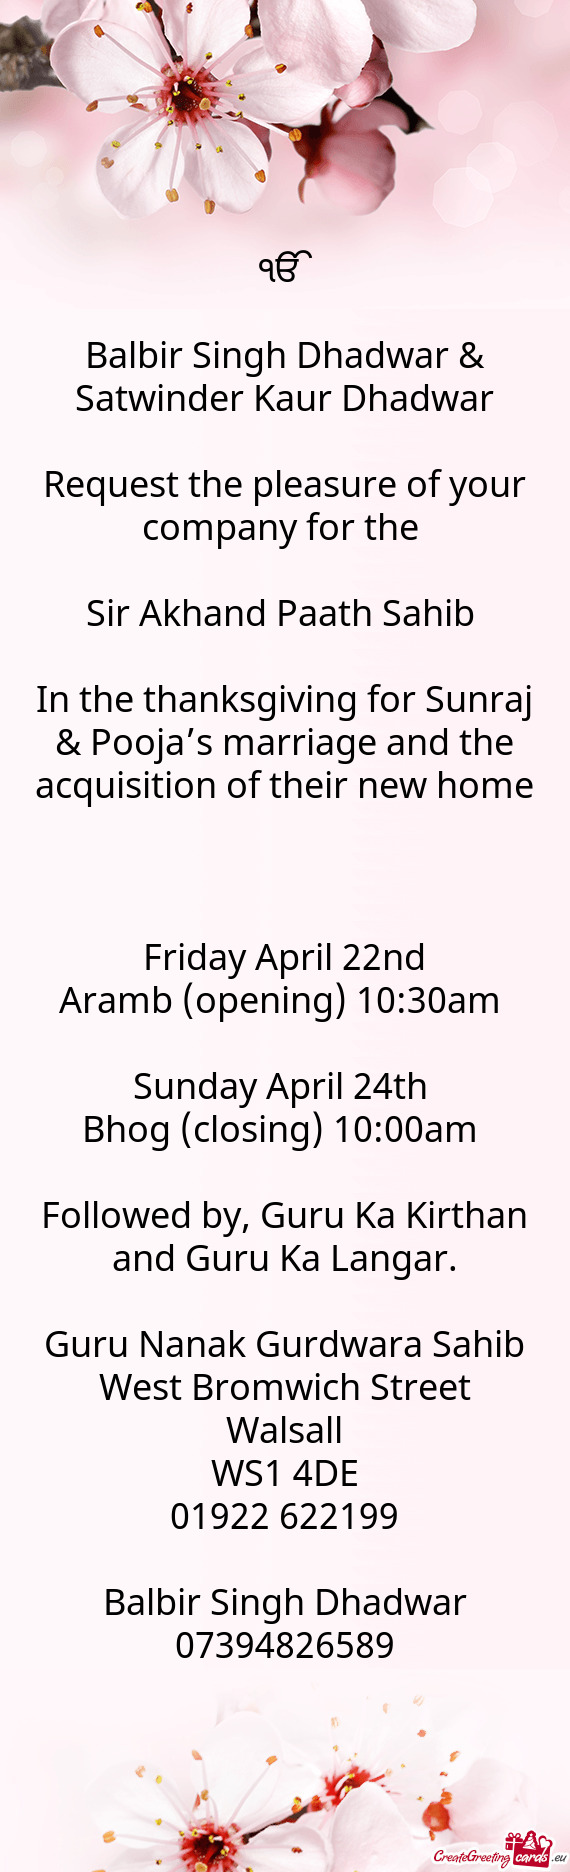 In the thanksgiving for Sunraj & Pooja’s marriage and the acquisition of their new home